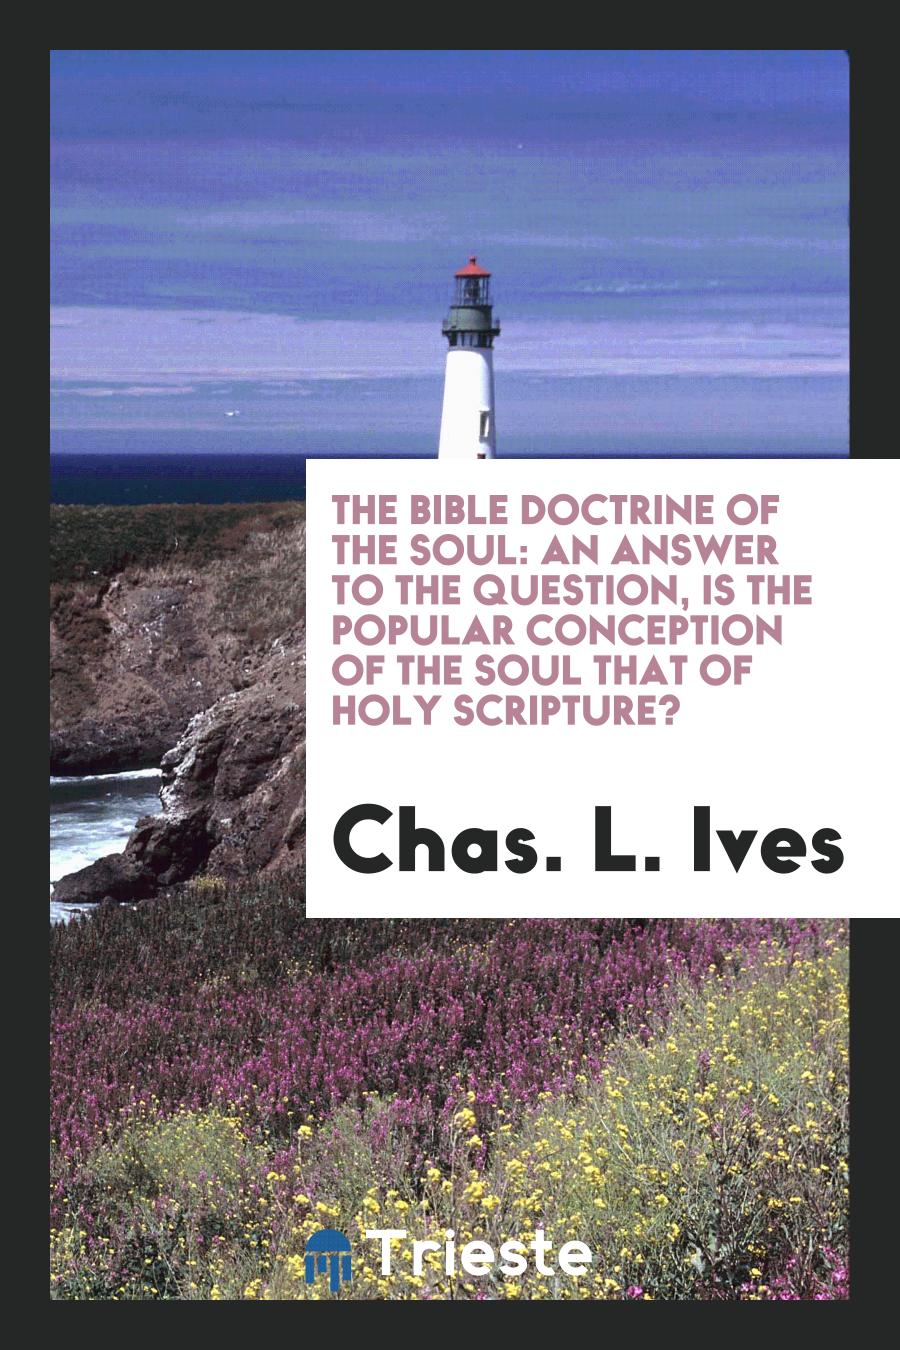 The Bible Doctrine of the Soul: An Answer to the Question, is the Popular Conception of the Soul That of Holy Scripture?